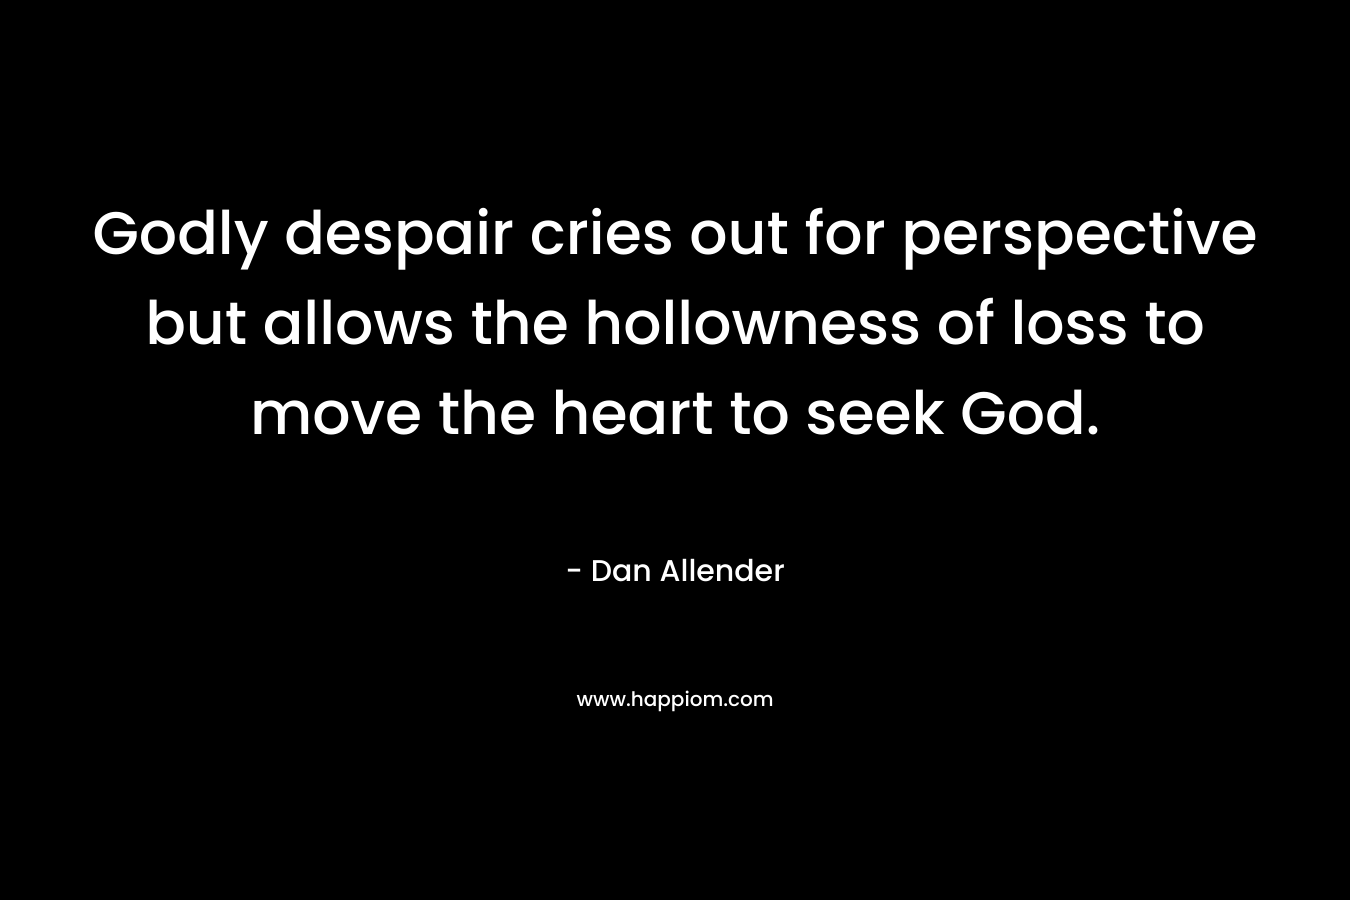 Godly despair cries out for perspective but allows the hollowness of loss to move the heart to seek God.